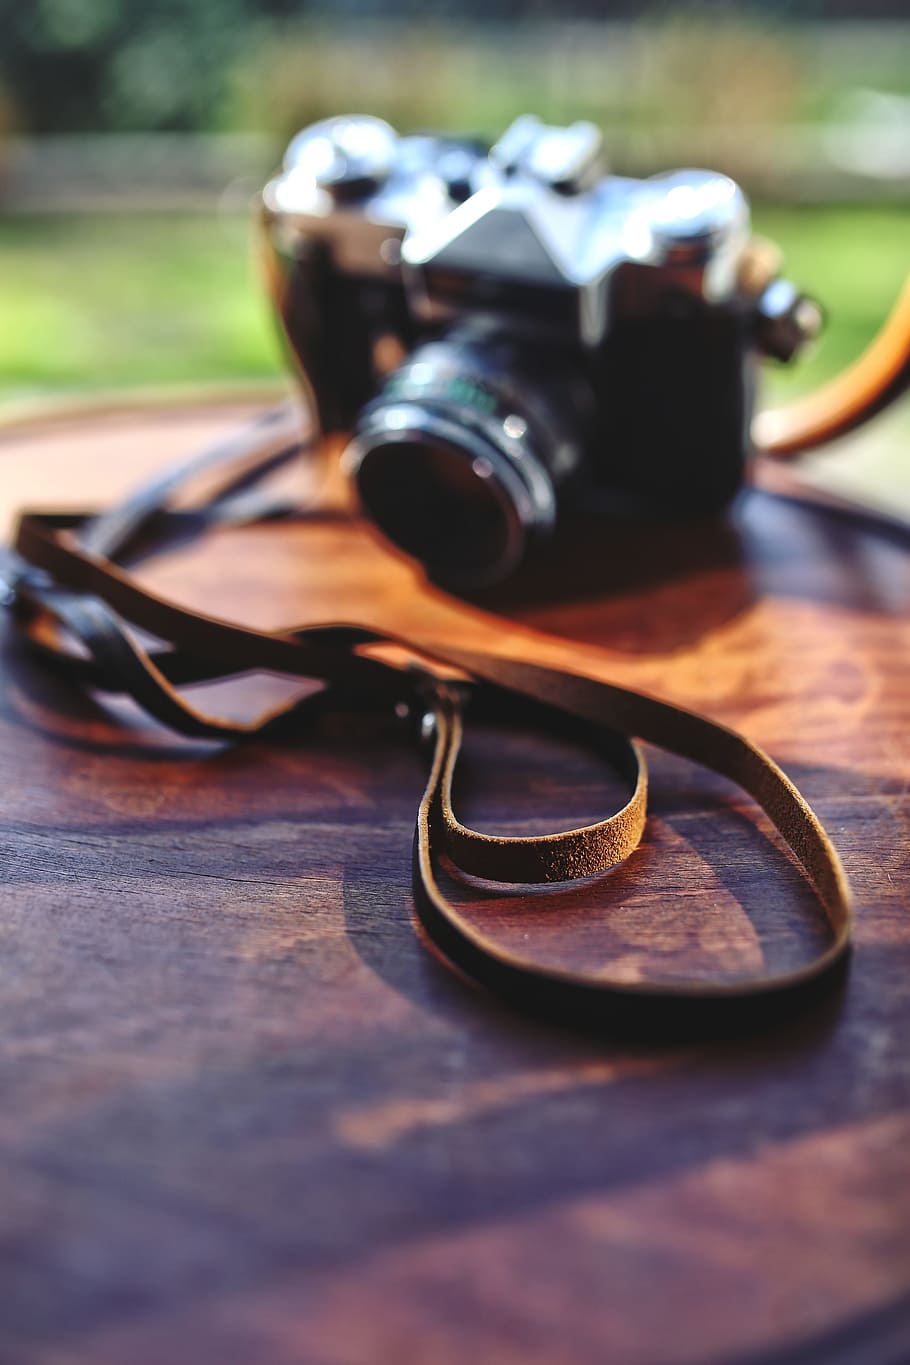 leather, strap, camera, vintage, old, wooden, zenit, selective focus, close-up, table